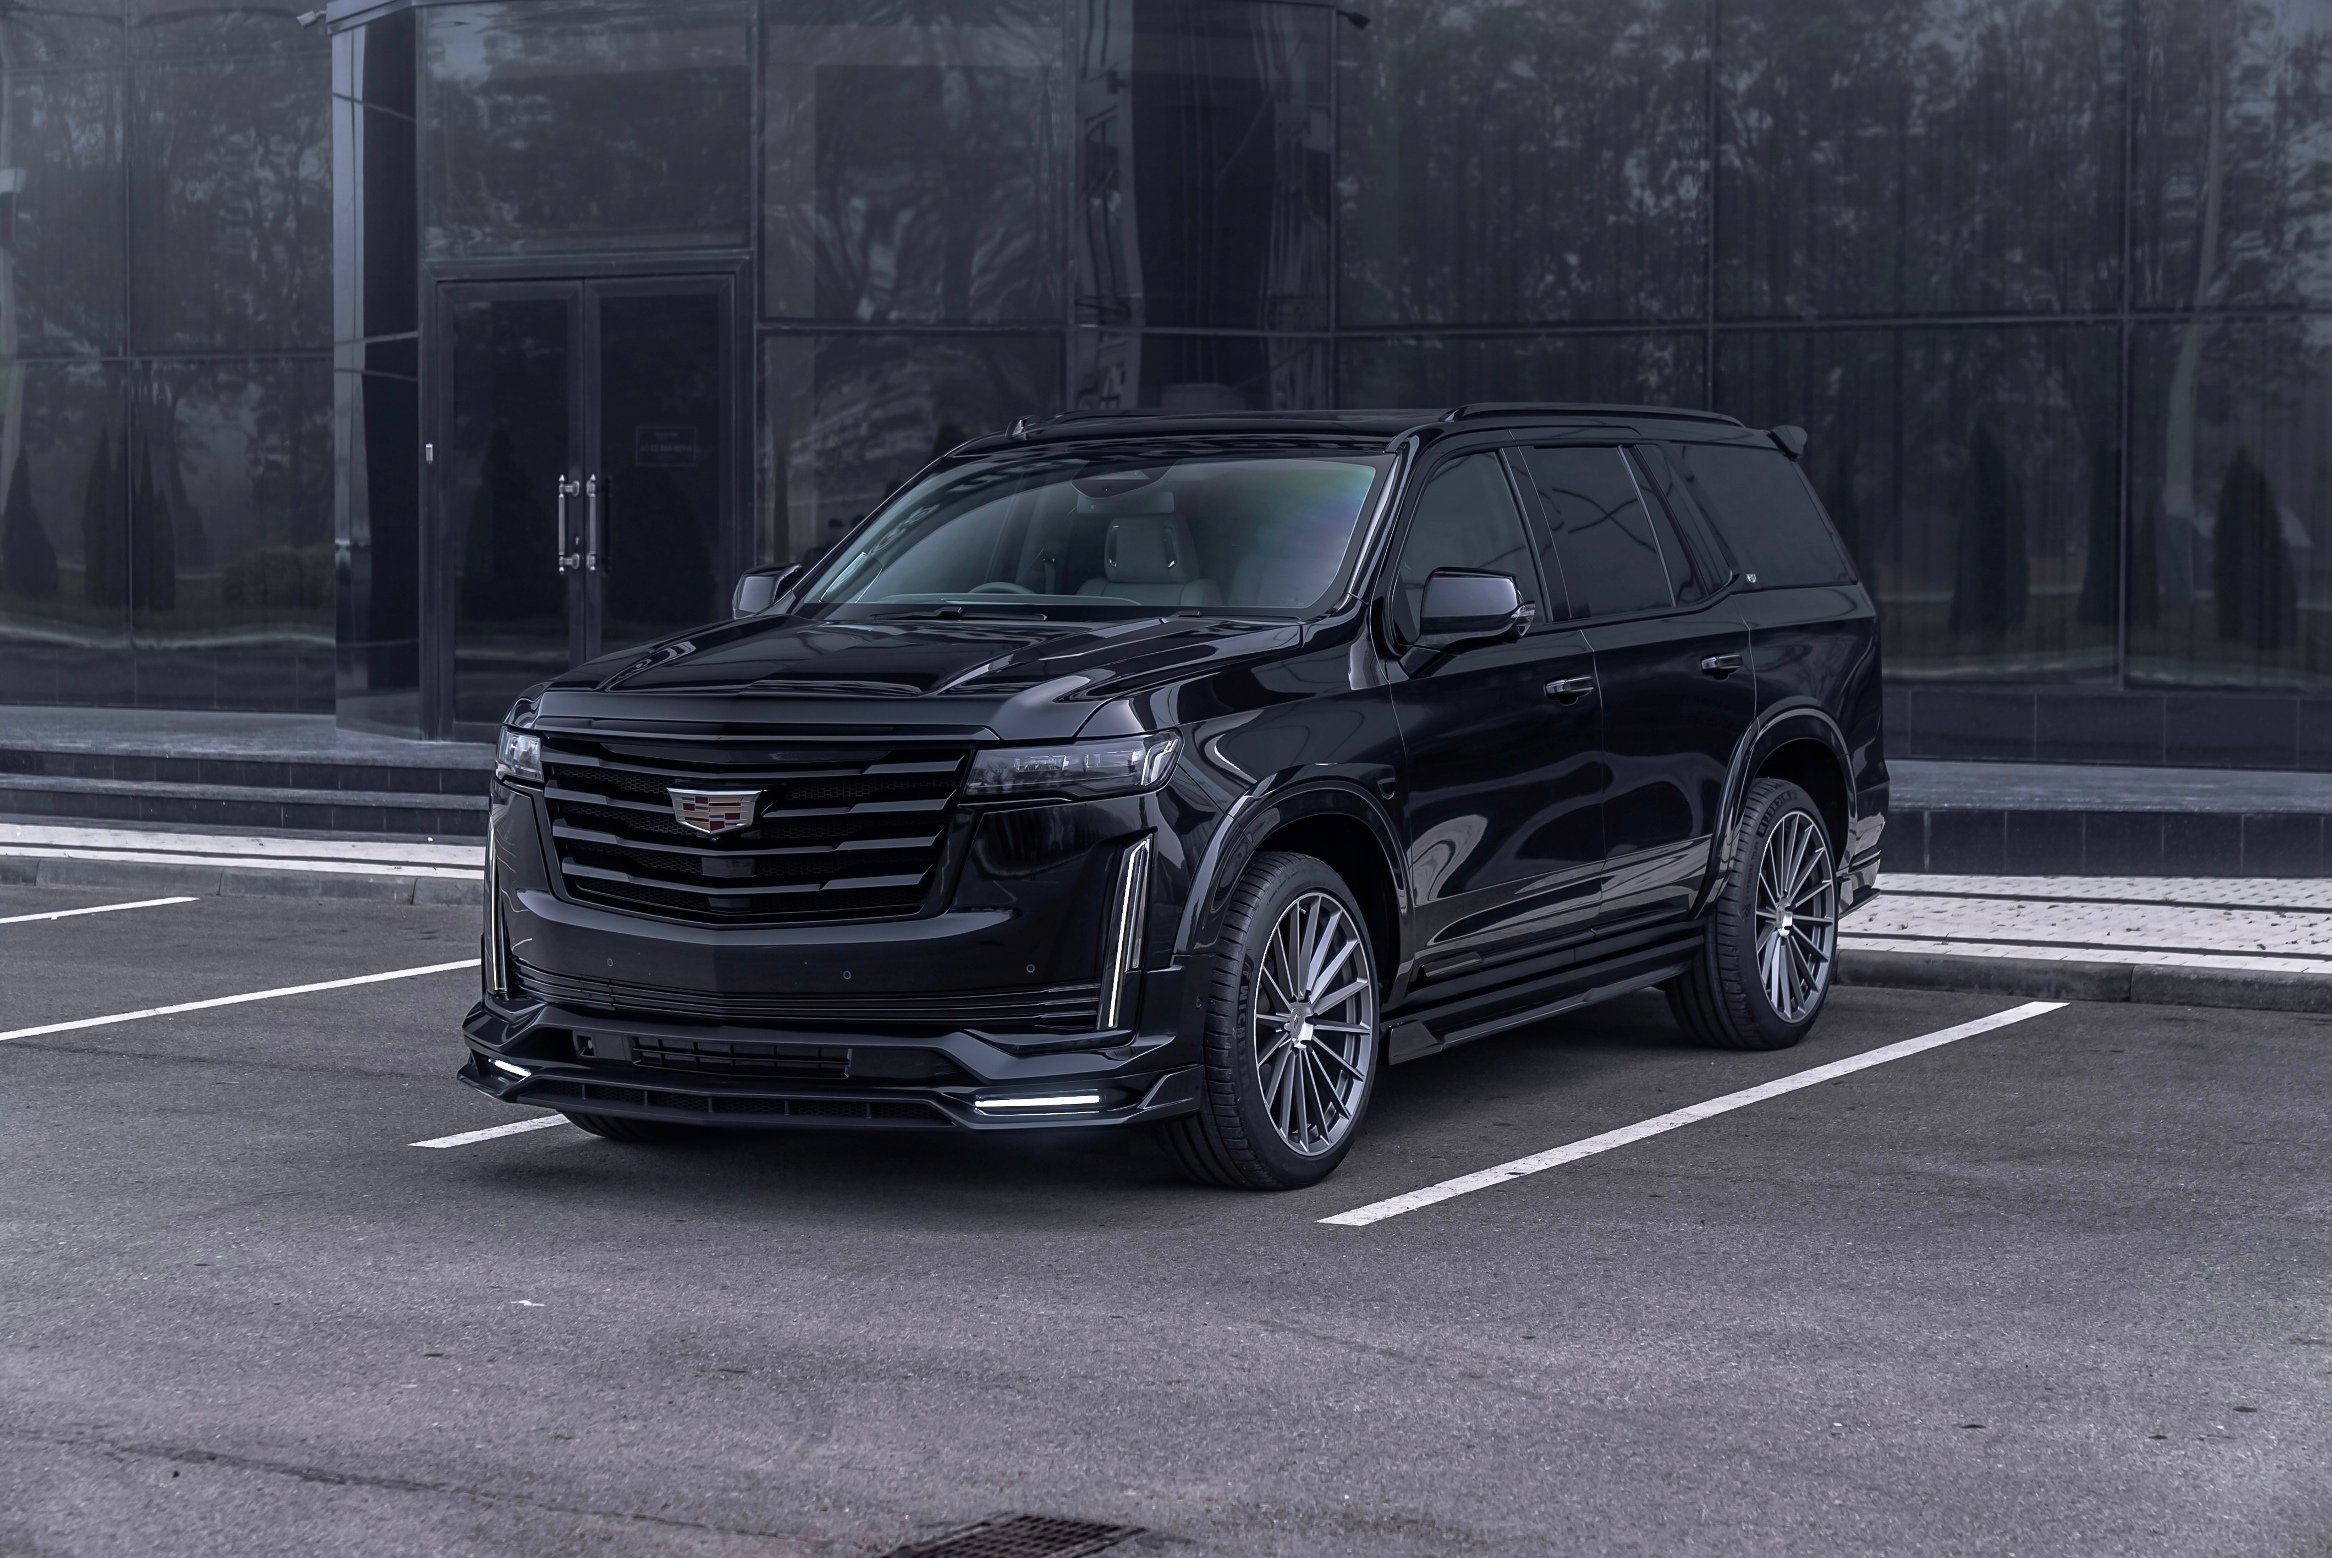 Check our price and buy SCL Performance body kit for Cadillac Escalade Miriada!